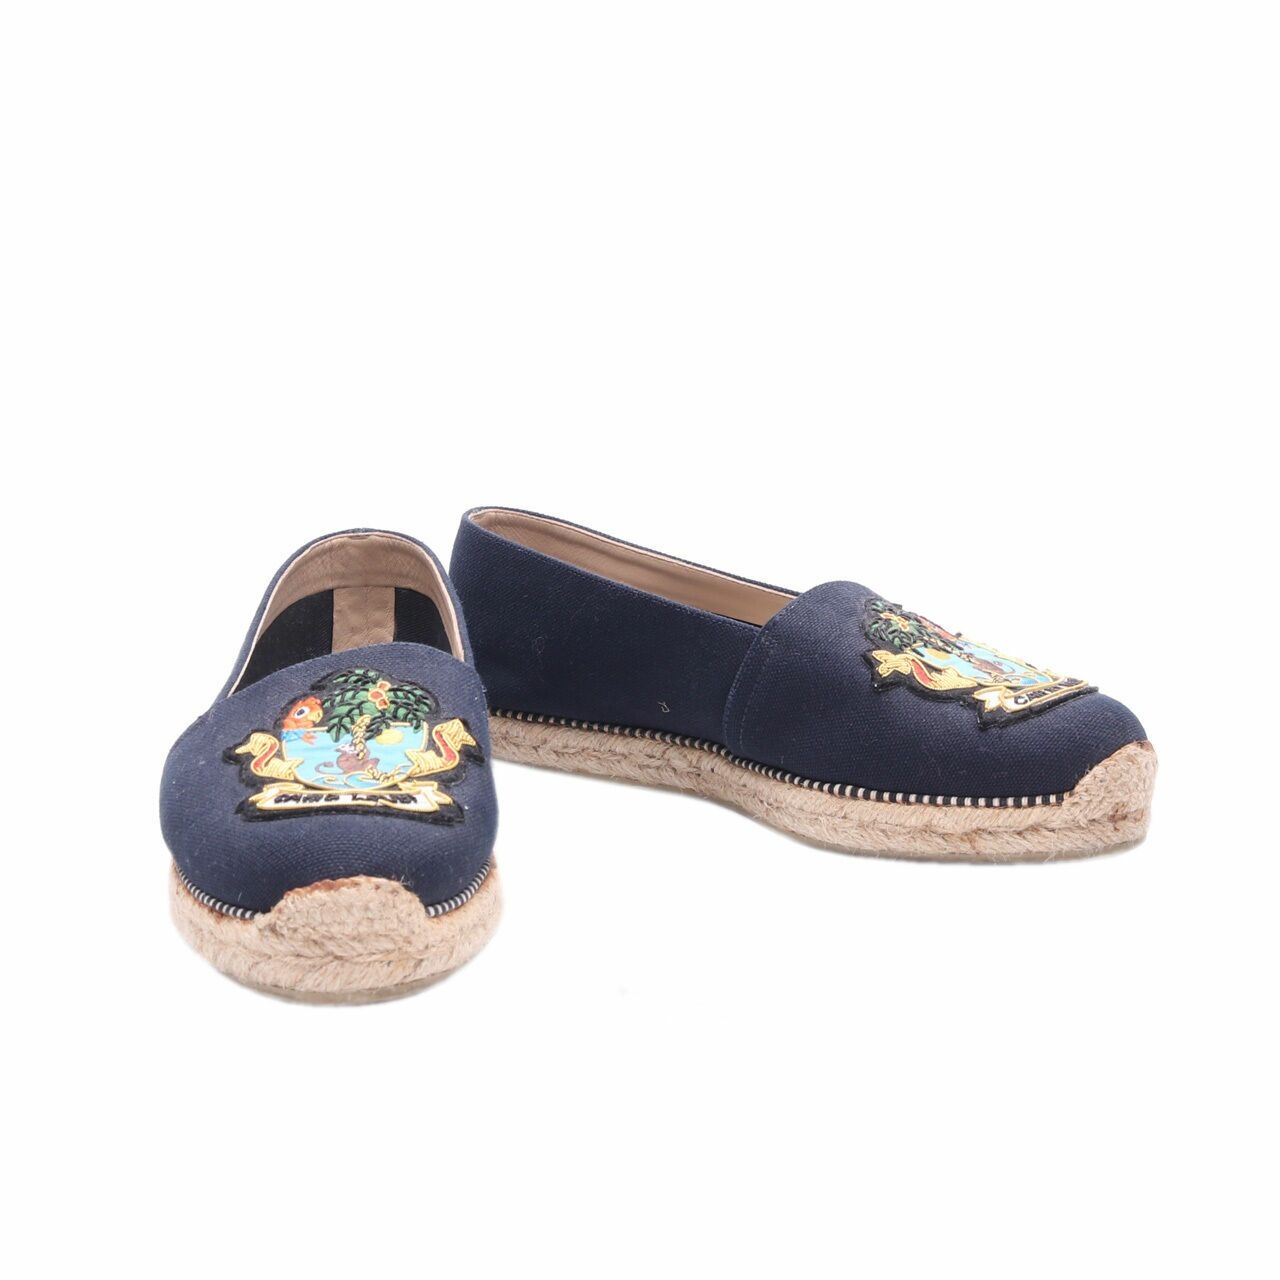 Christian Louboutin Carlo Loubi Navy Embroidered Espadrilles Flats Shoes